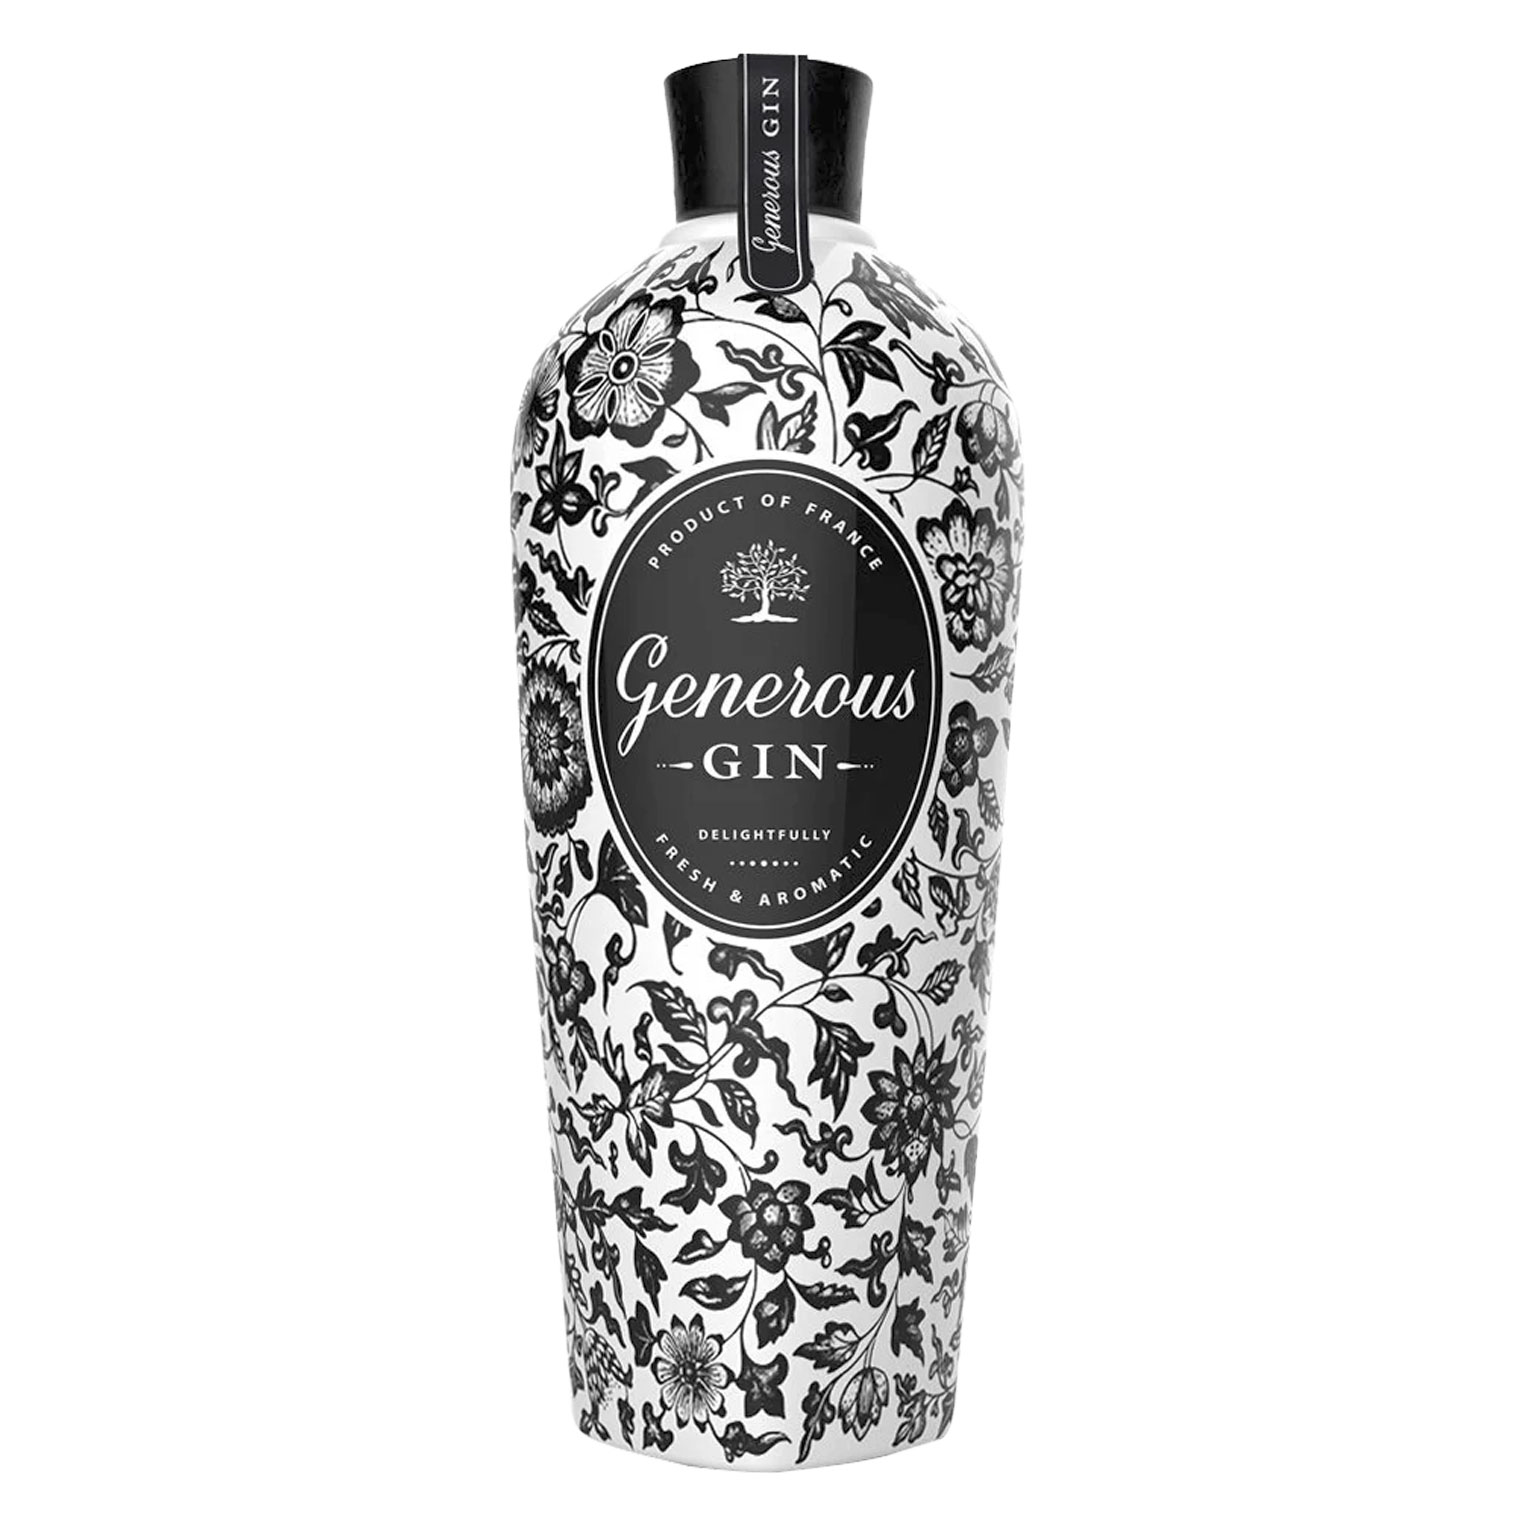 Gin - Generous Gin - France - 44° - 70cl